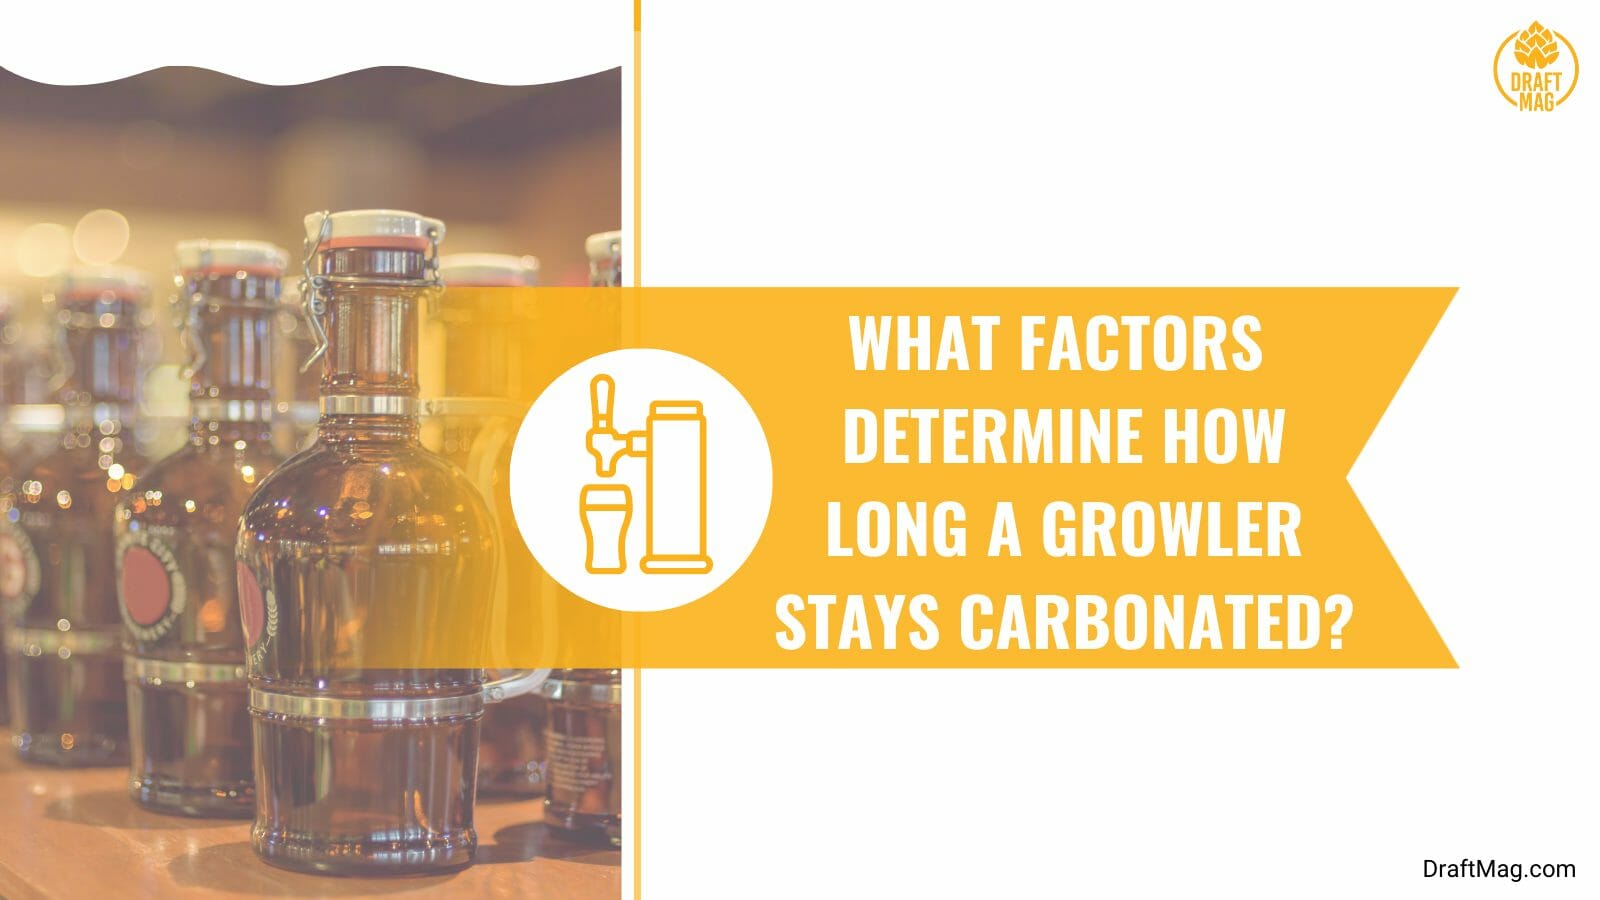 Factors for a carbonated growler